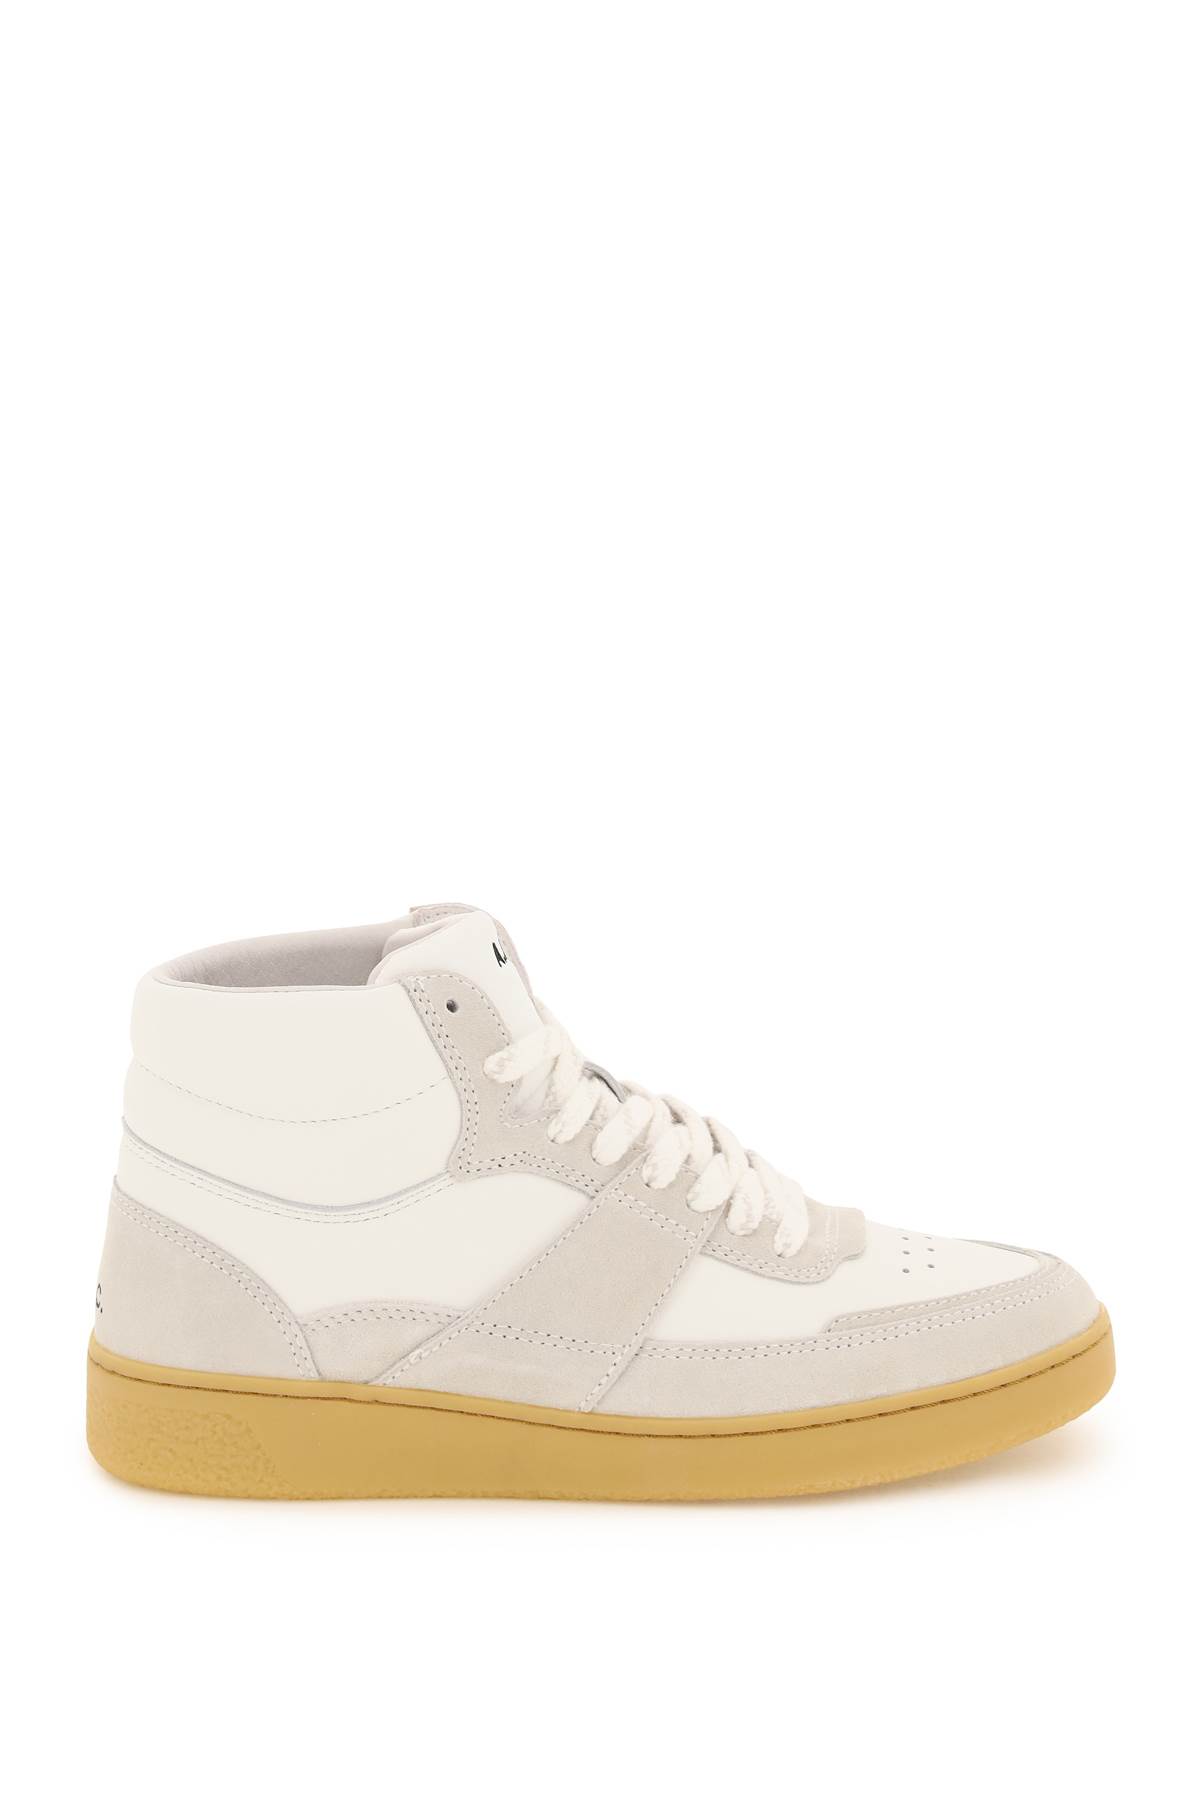 APC LEATHER PLAIN HIGH SNEAKERS